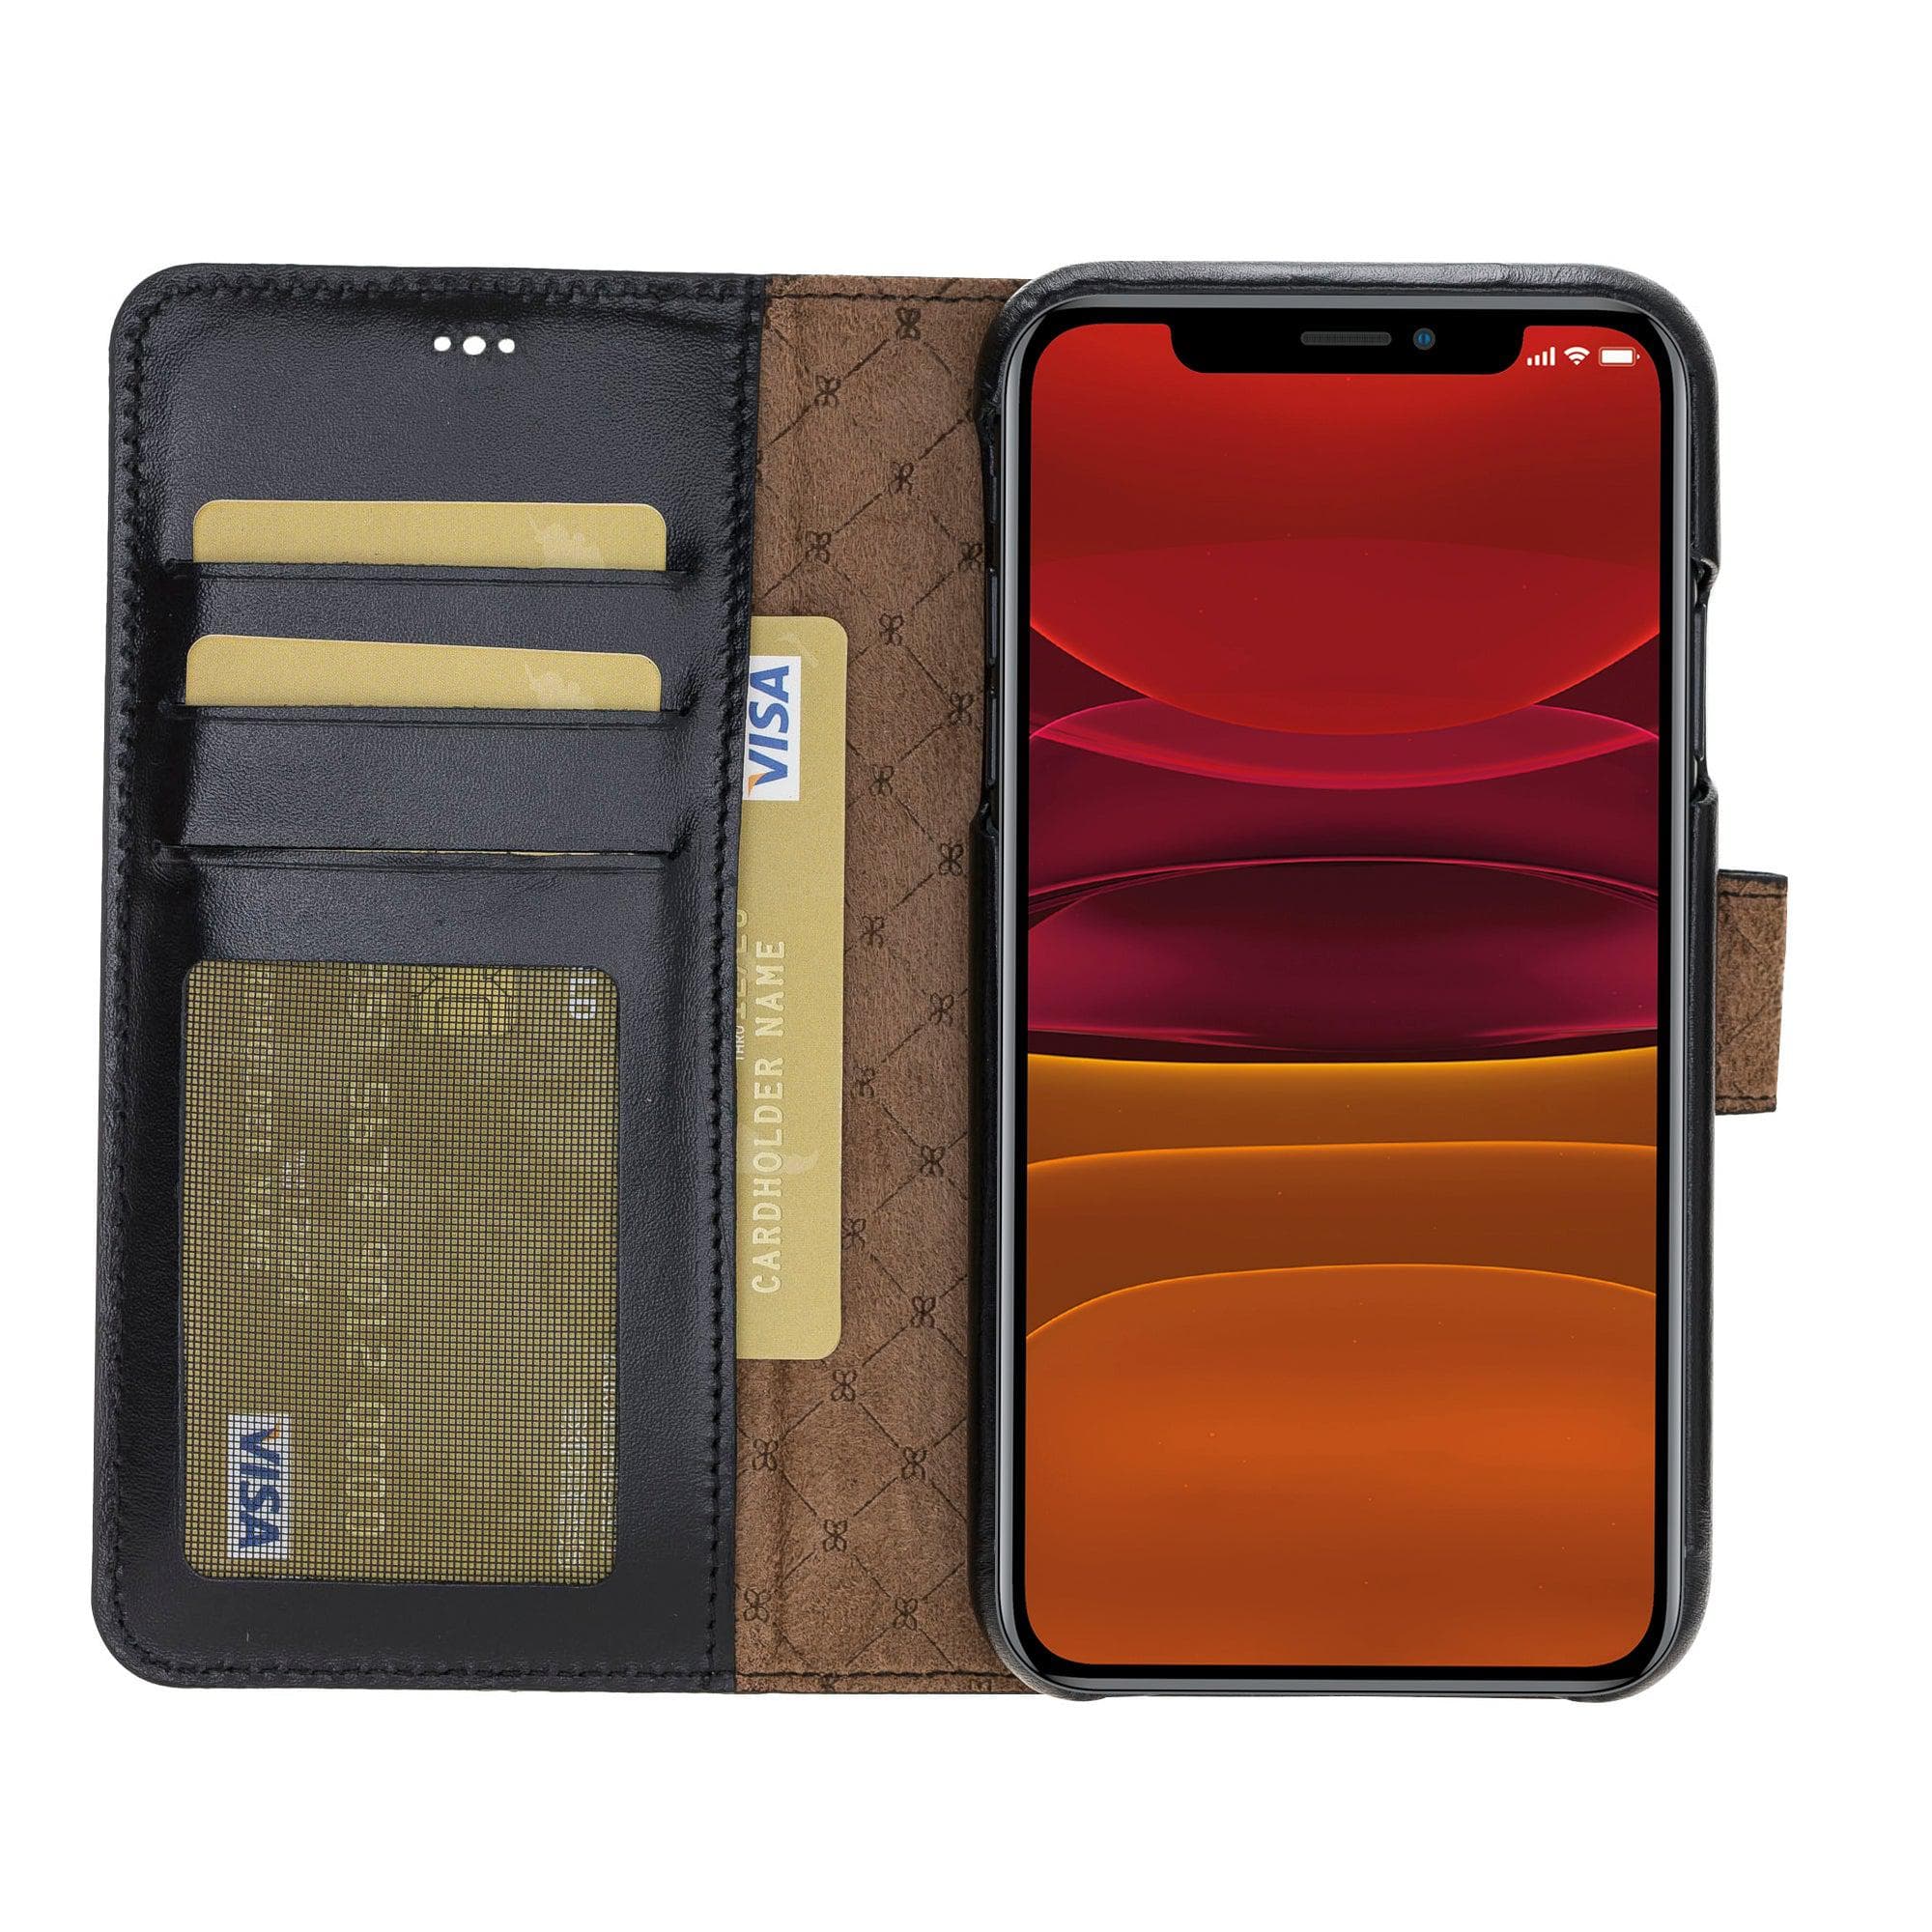 Detachable Fully Covering Leather Wallet Case For Apple iPhone 11 Series Bouletta LTD